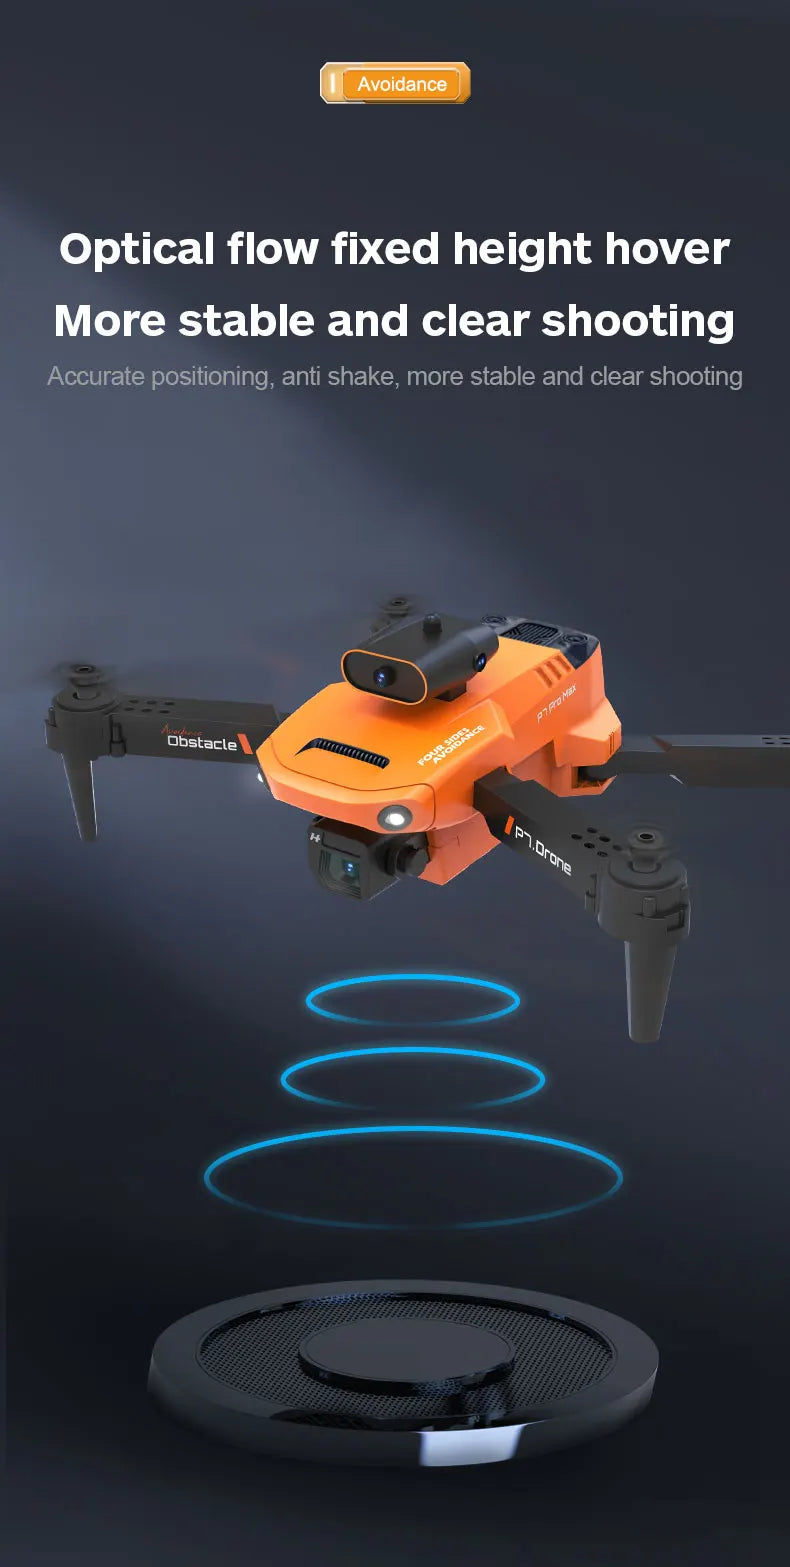 P7 Drone, avoidance optical flow fixed height hover more stable and clear shooting .